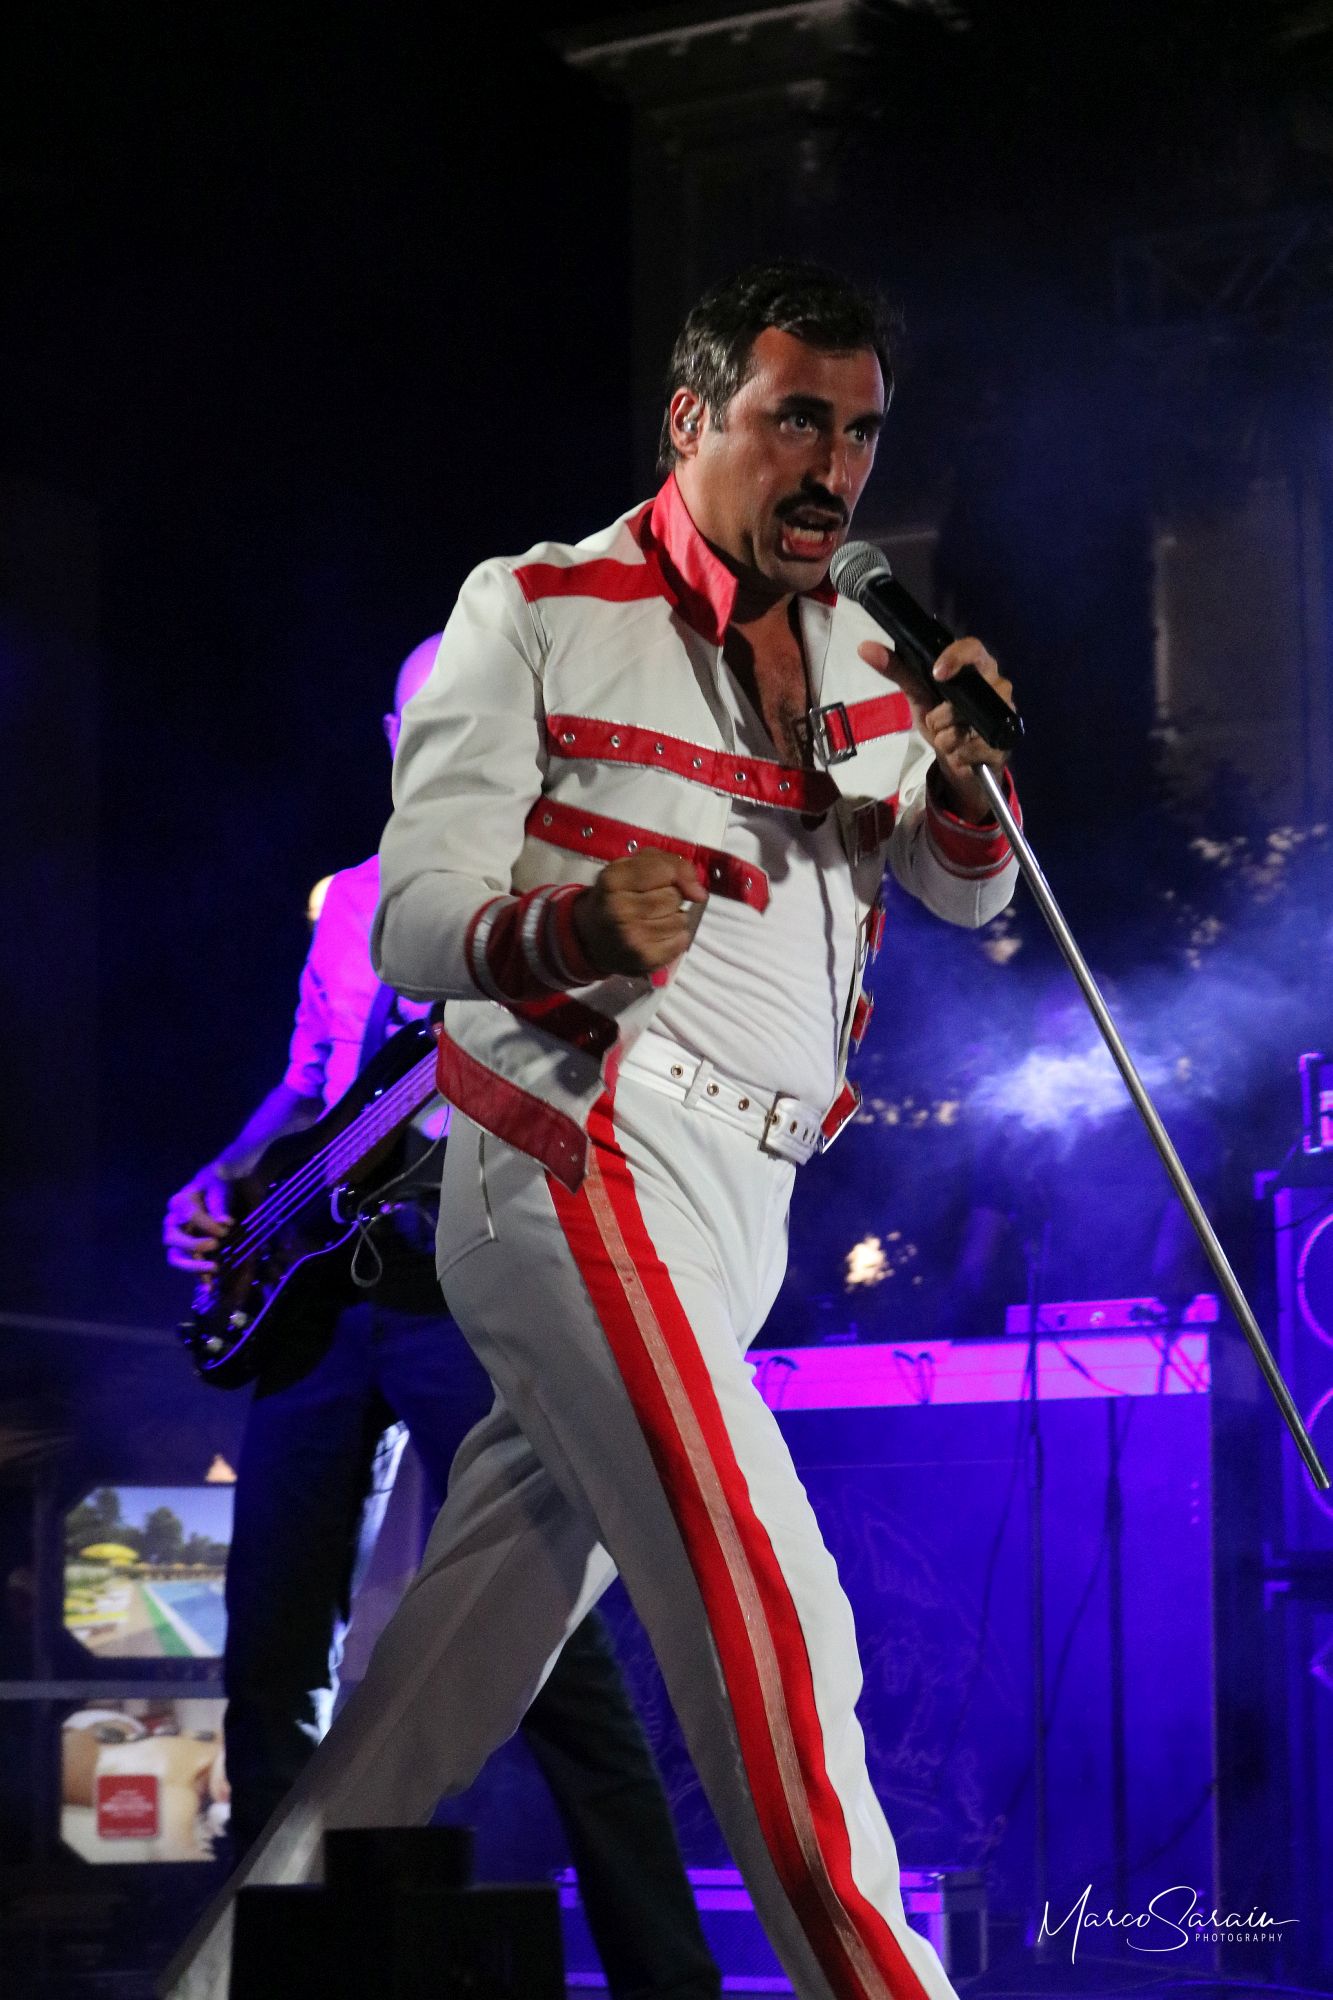 Queen Legend - Tribute Band @ Abano Terme 2019